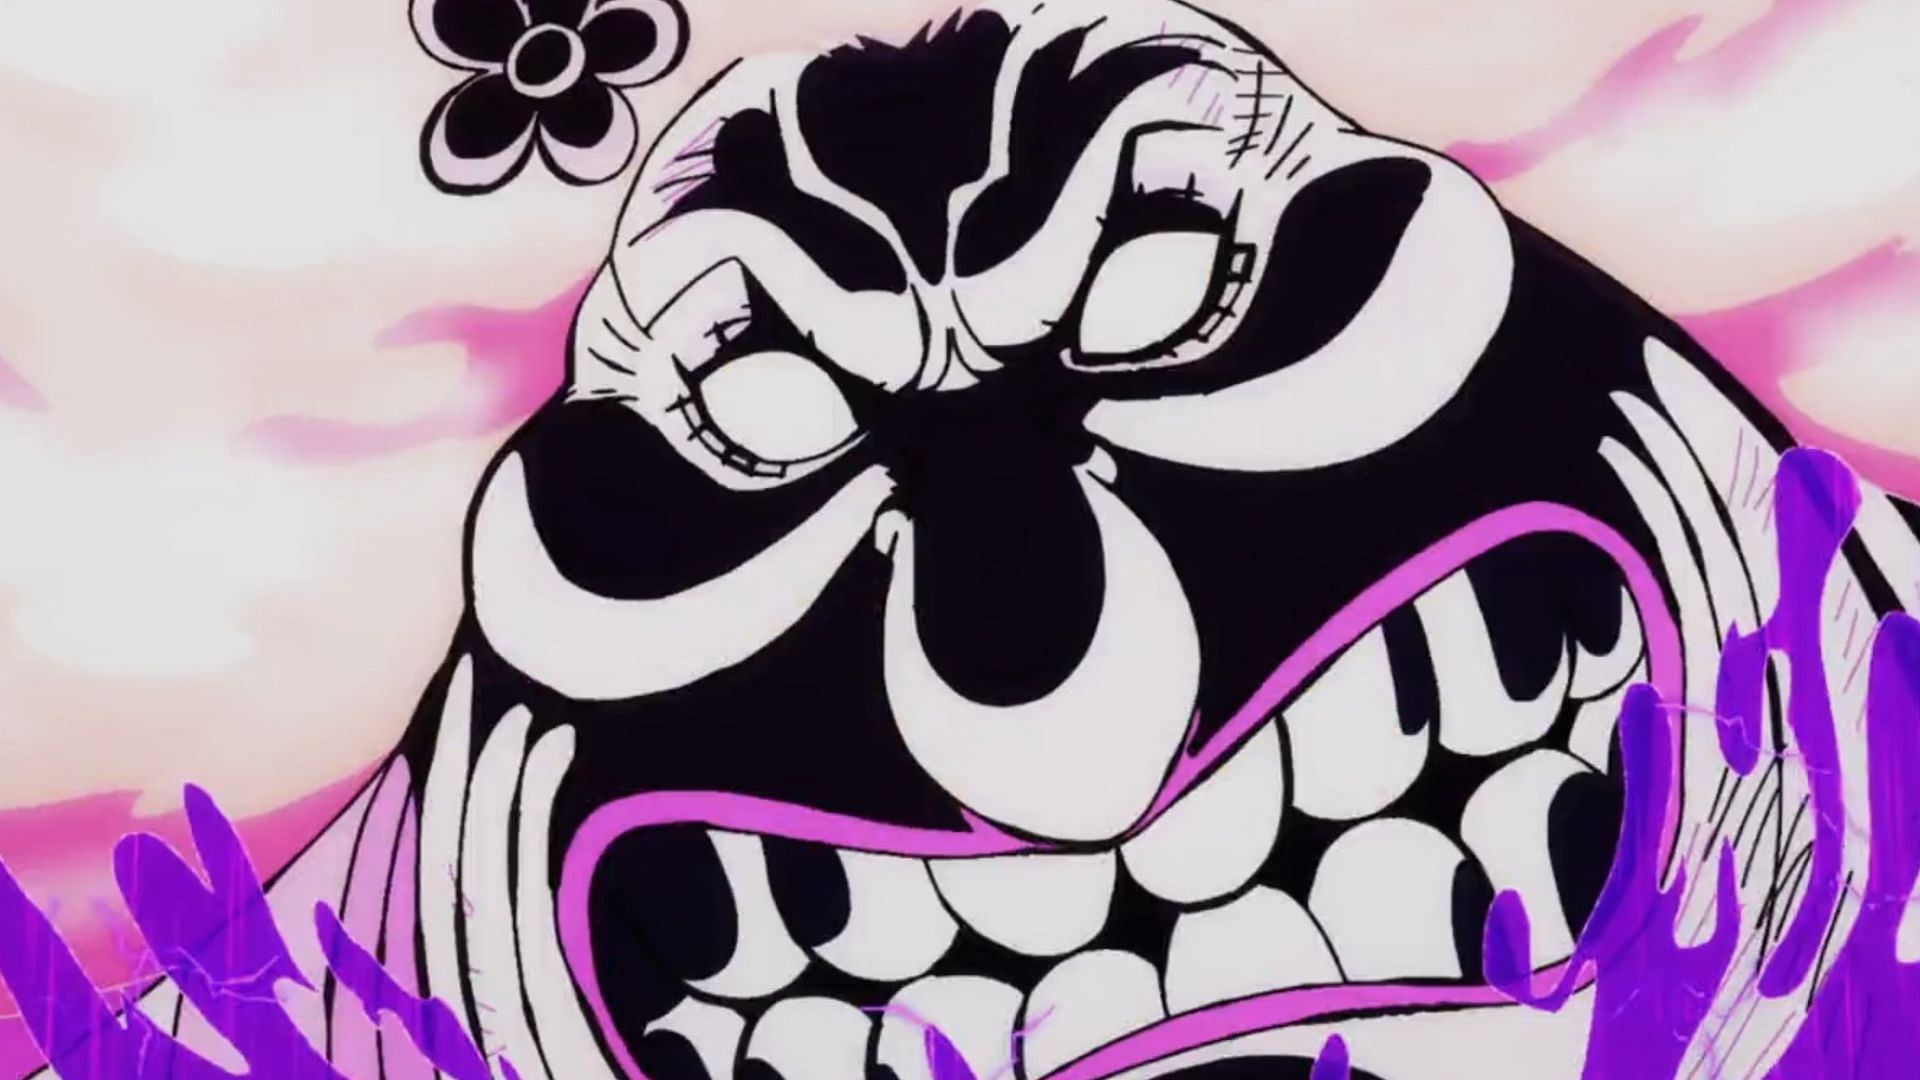 Big Mom as seen in One Piece episode 1067 (Image via Toei)